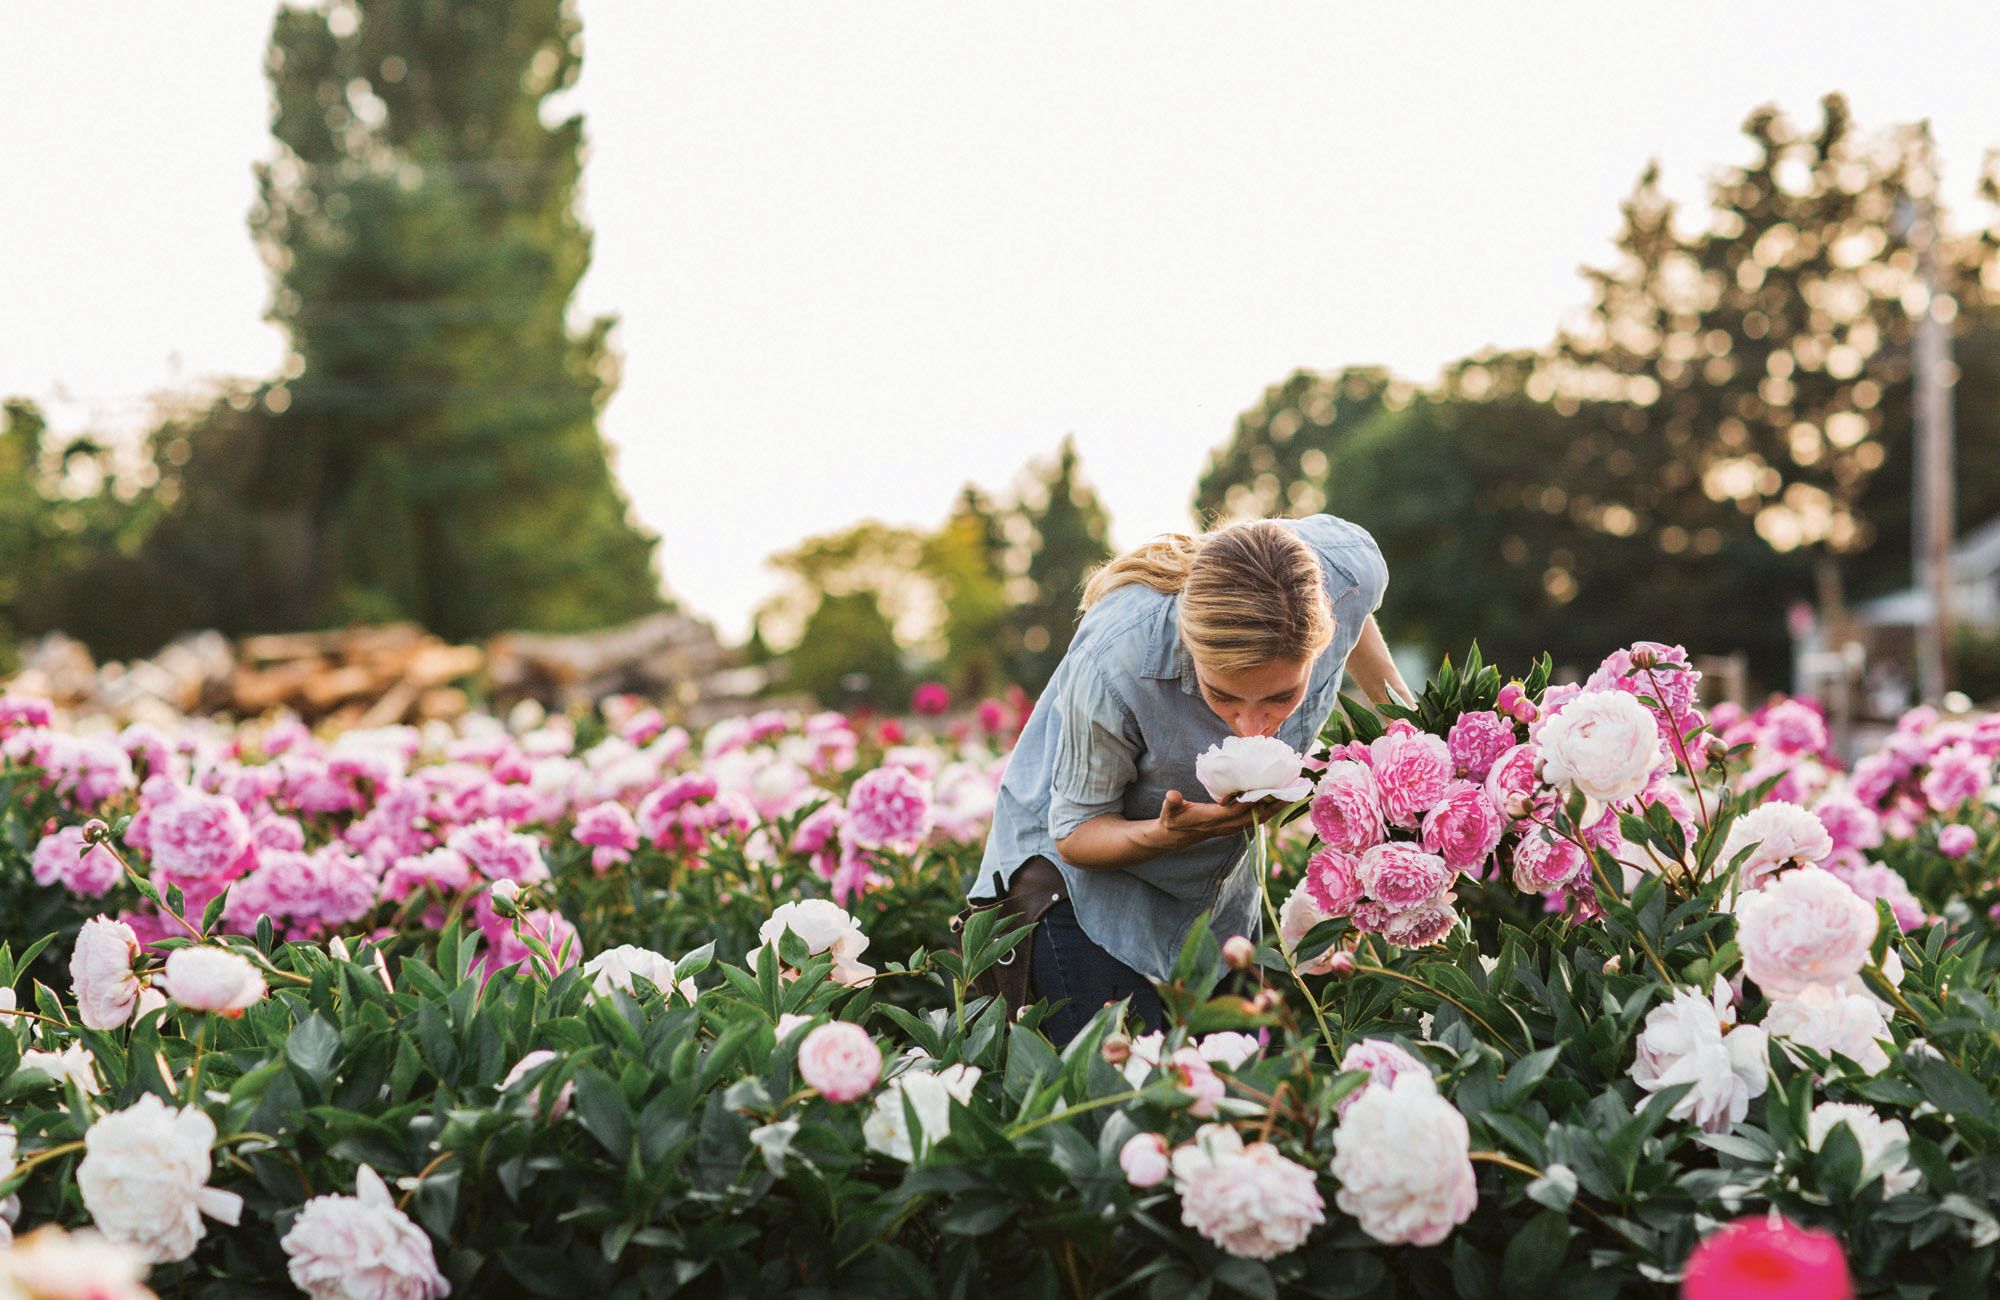 How to Grow Peonies - How to Care for Peonies